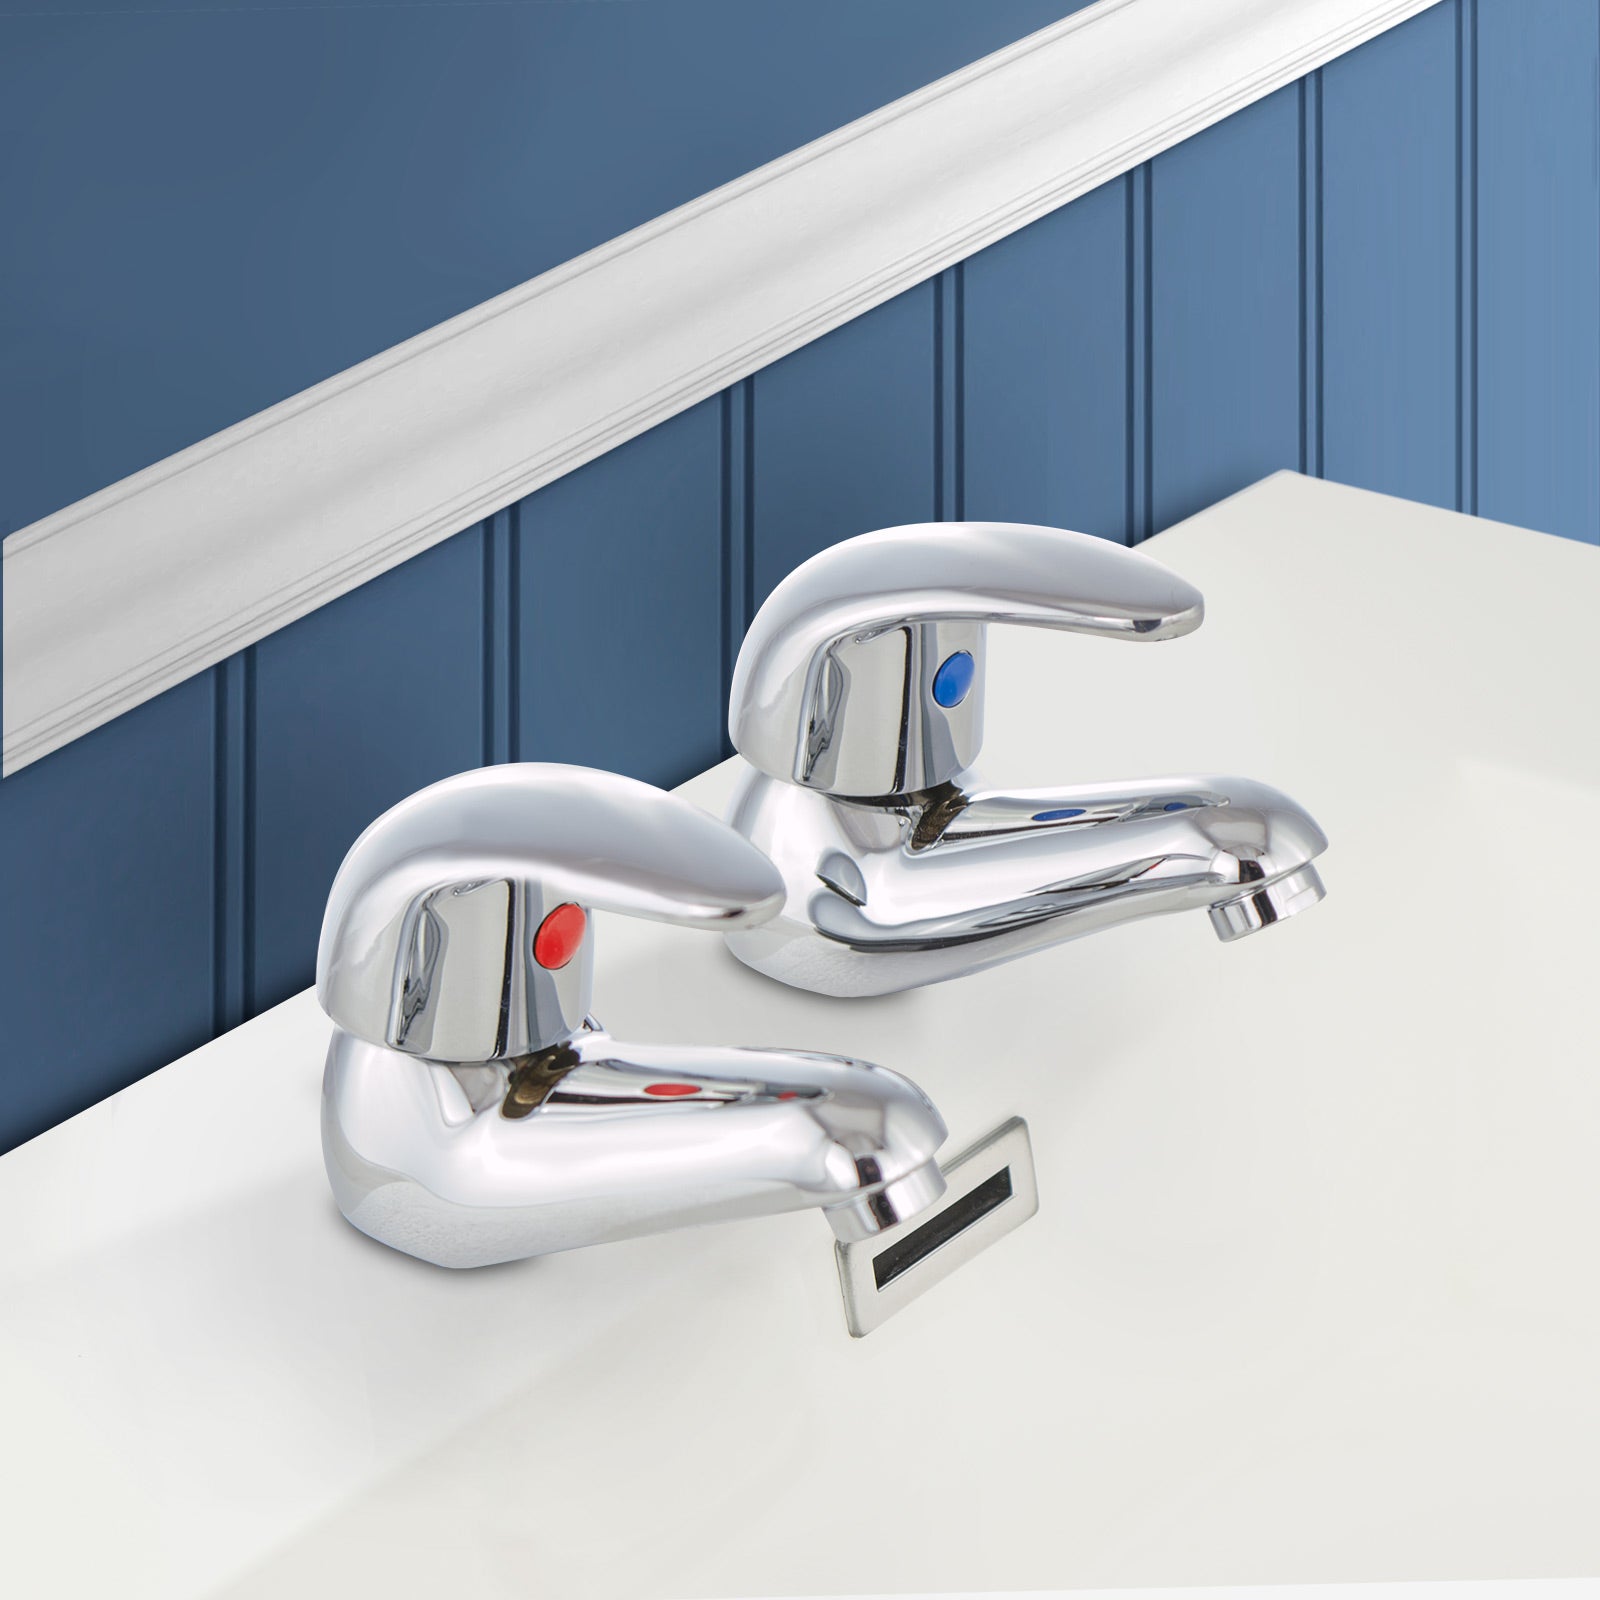 Studio Contemporary Set Of Twin Basin Taps & Bath Shower Mixer Tap With Handheld Kit